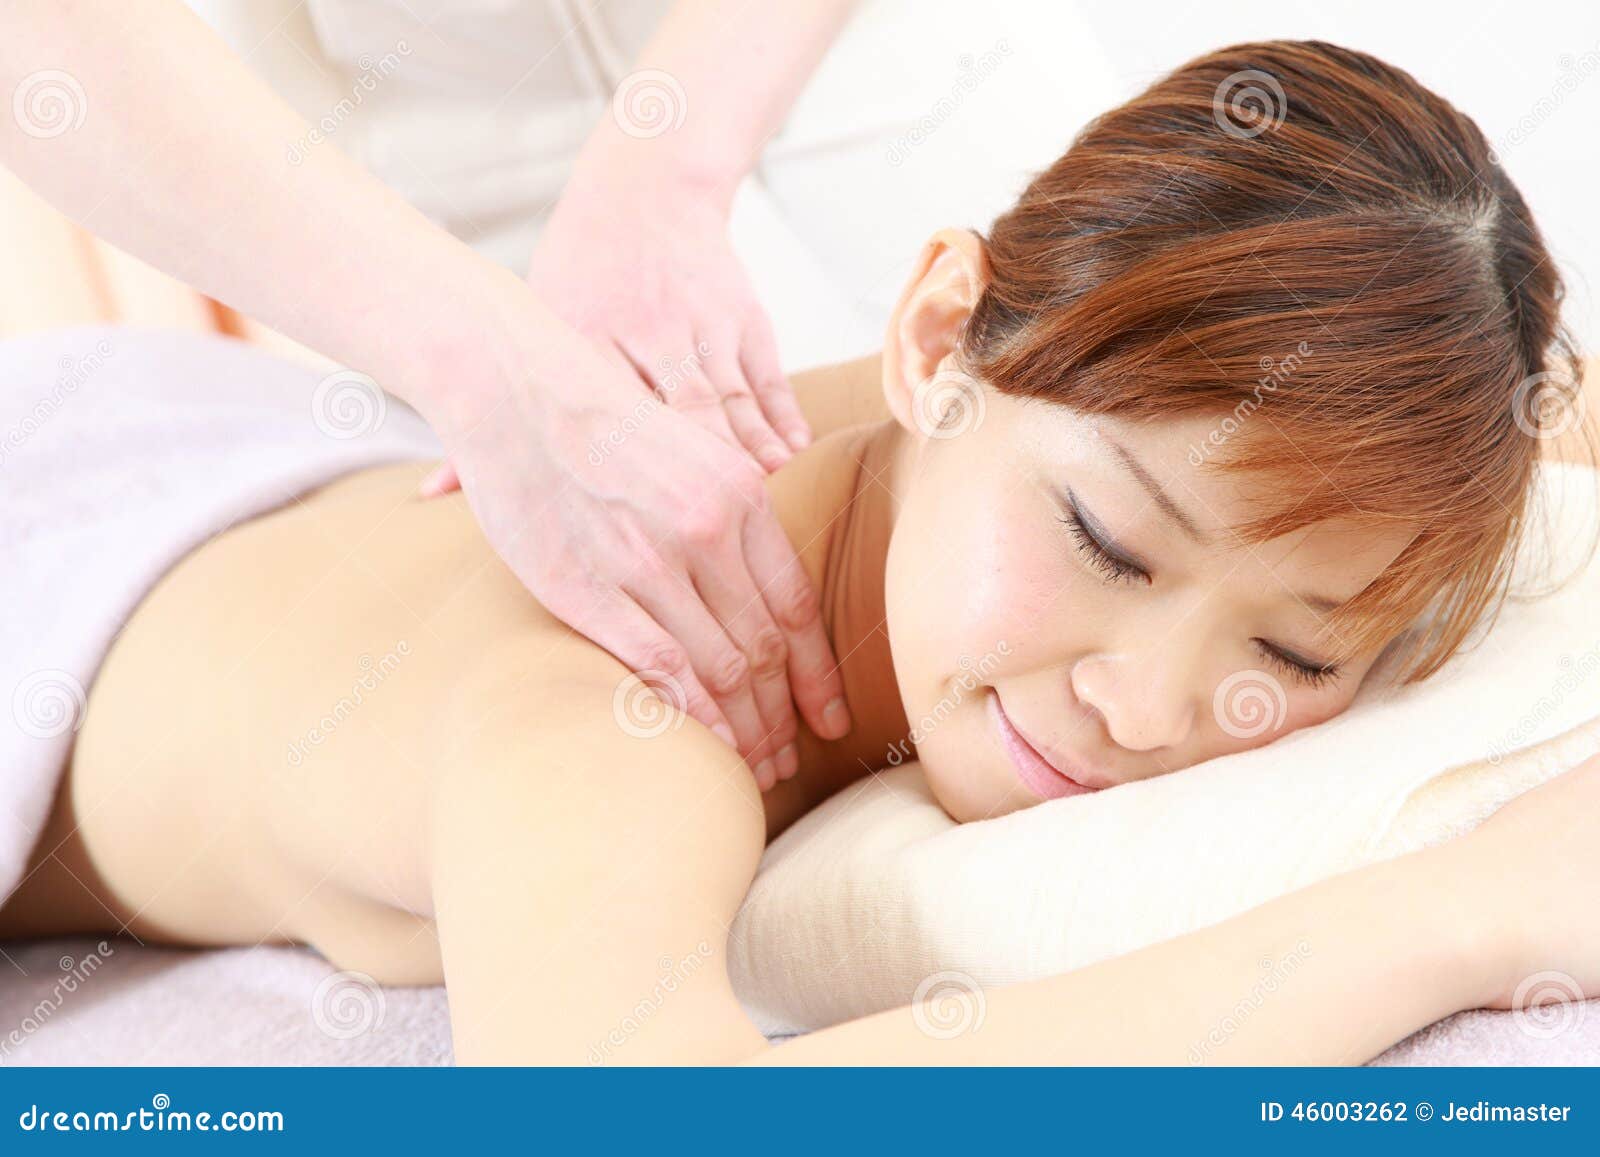 chicos bar recommends Japanese Young Wife Massage